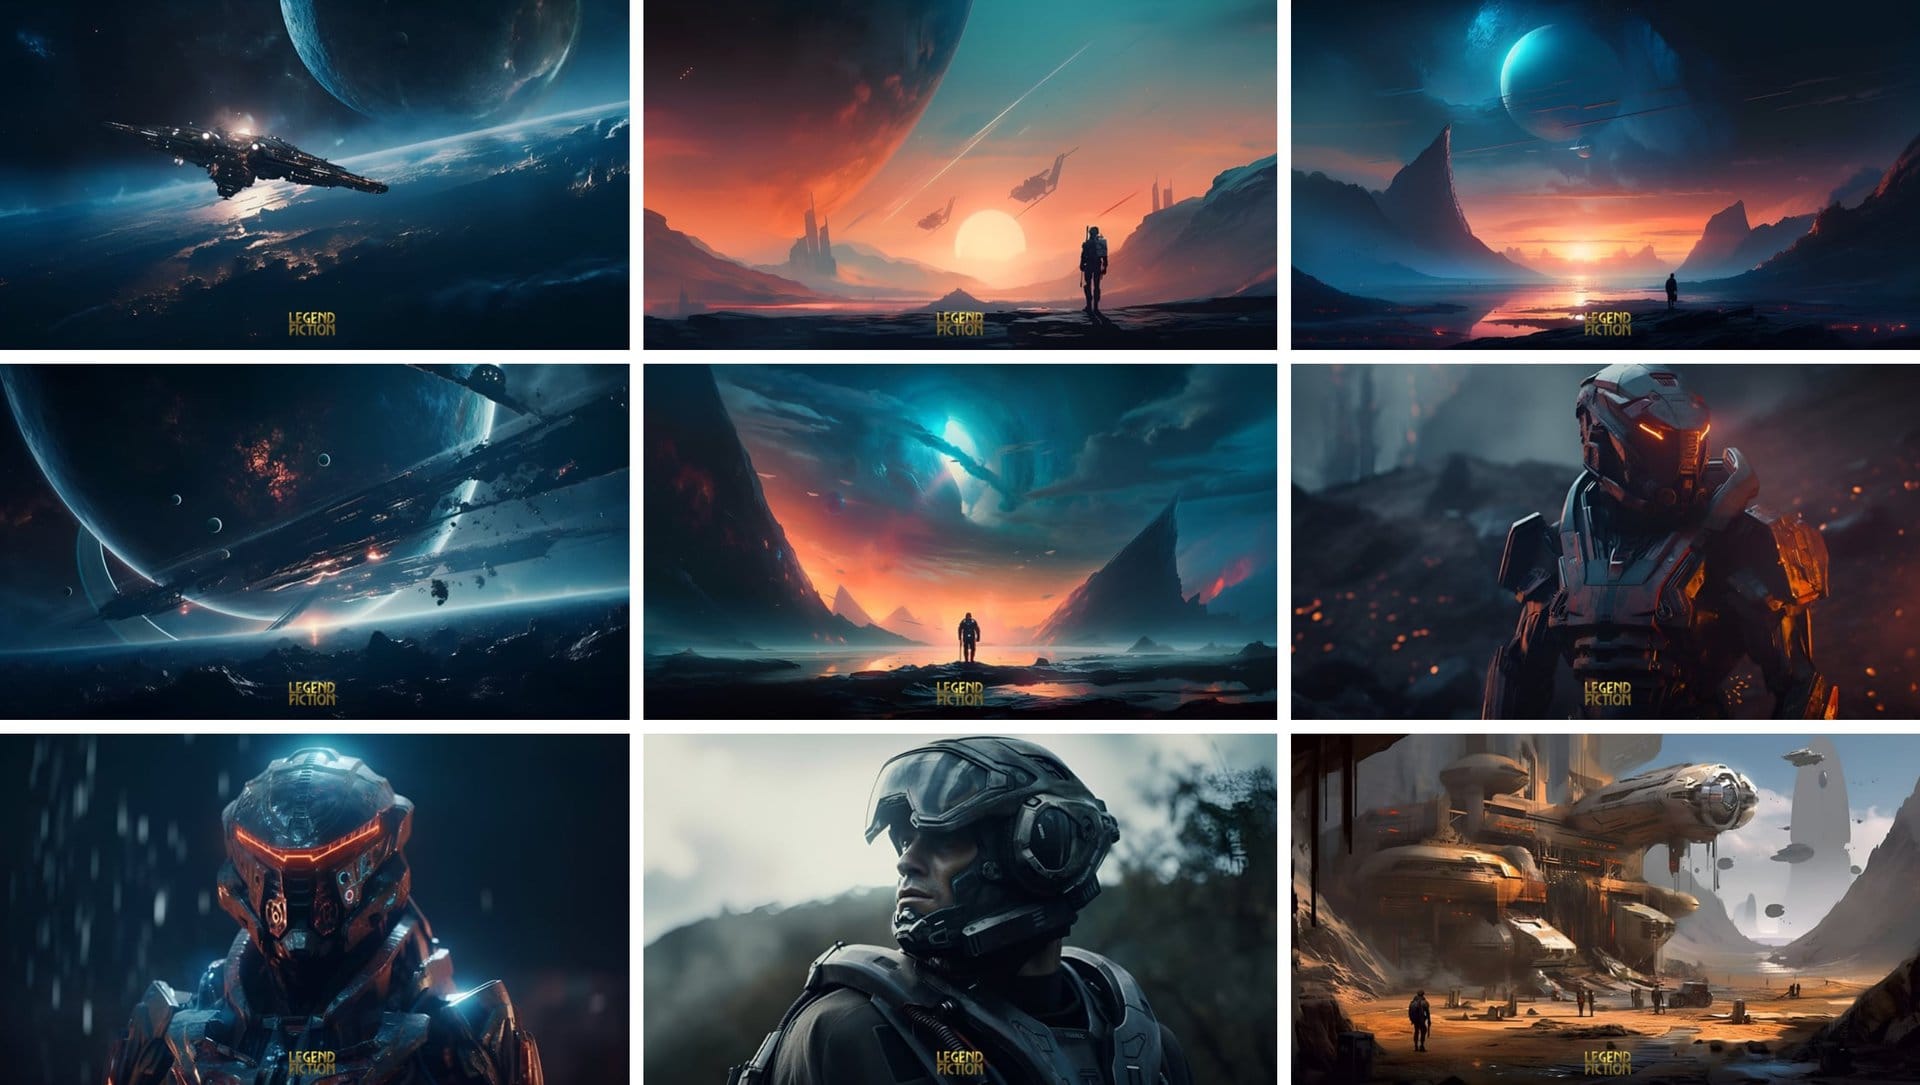 Epic Science Fiction Heroes, Vehicles, & Landscapes- Free wallpapers for your screens, stories, & inspiration!